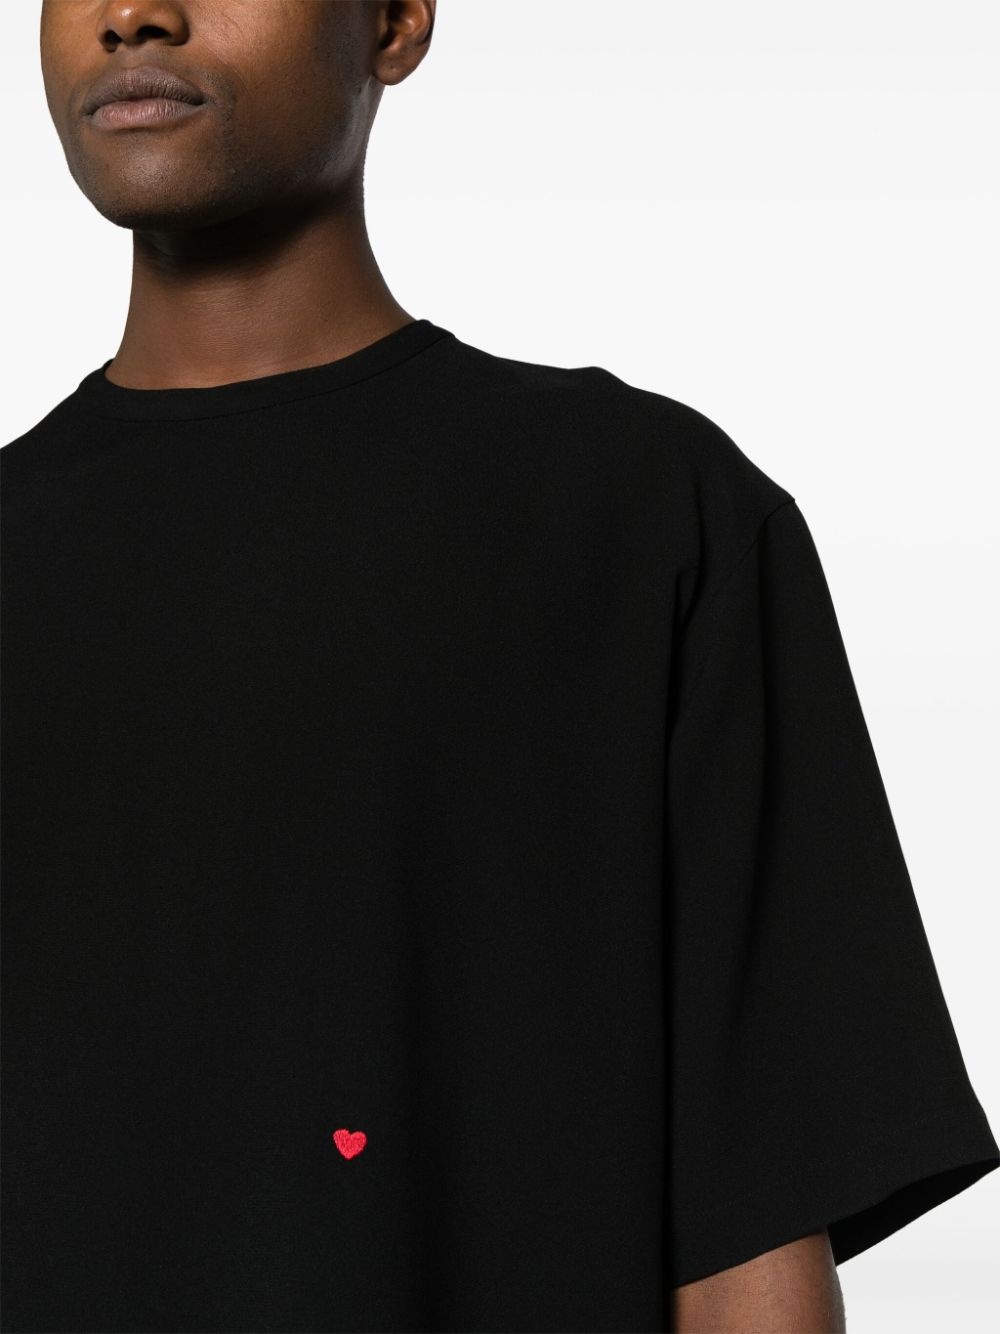 embroidered-heart crepe-texture T-shirt - 5